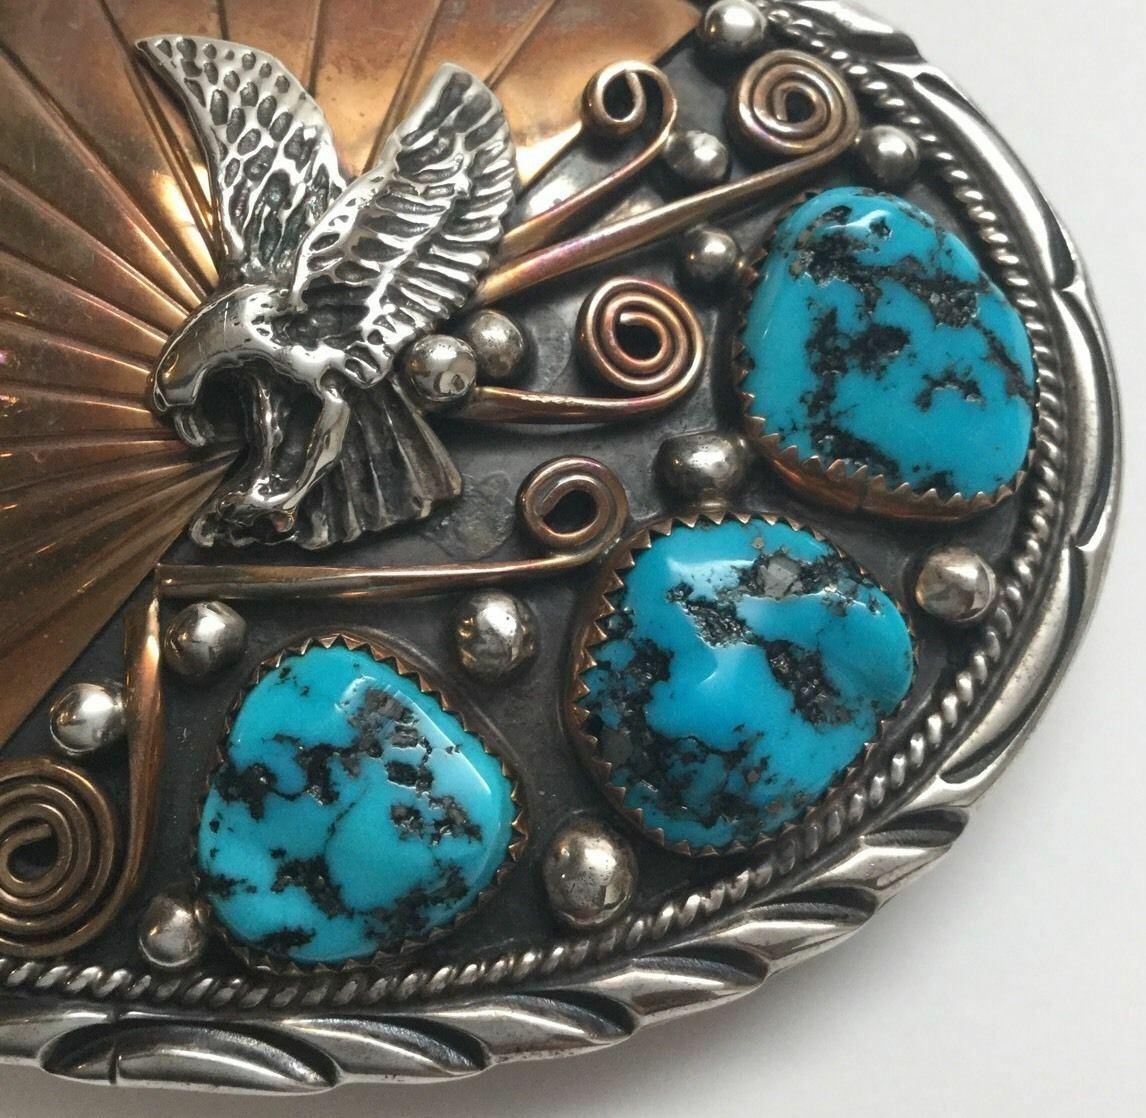 Native American Navajo Sterling silver and gold plated turquoise belt buckle by Archie Martinez.

Marked: STERLING, 1/20 12K GF.

Signed: A. Mtz.

Measures: 3 1/4